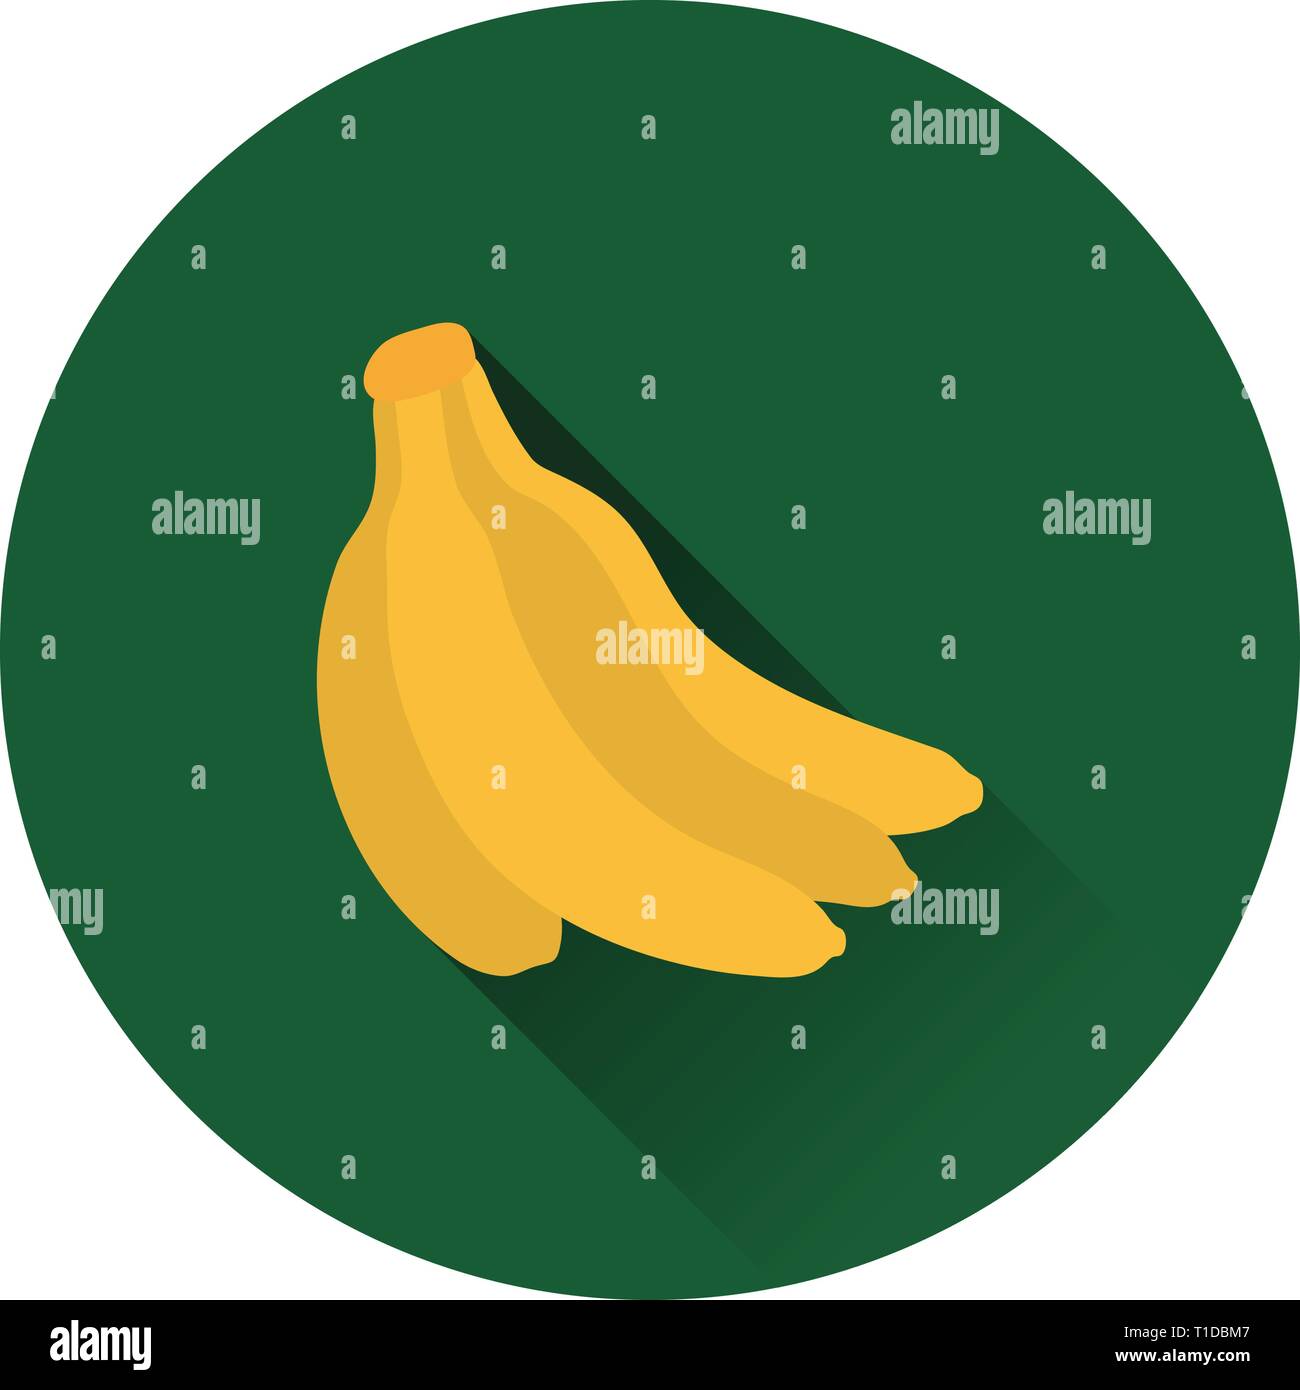 Flat design icon of Banana in ui colors. Vector illustration. Stock Vector